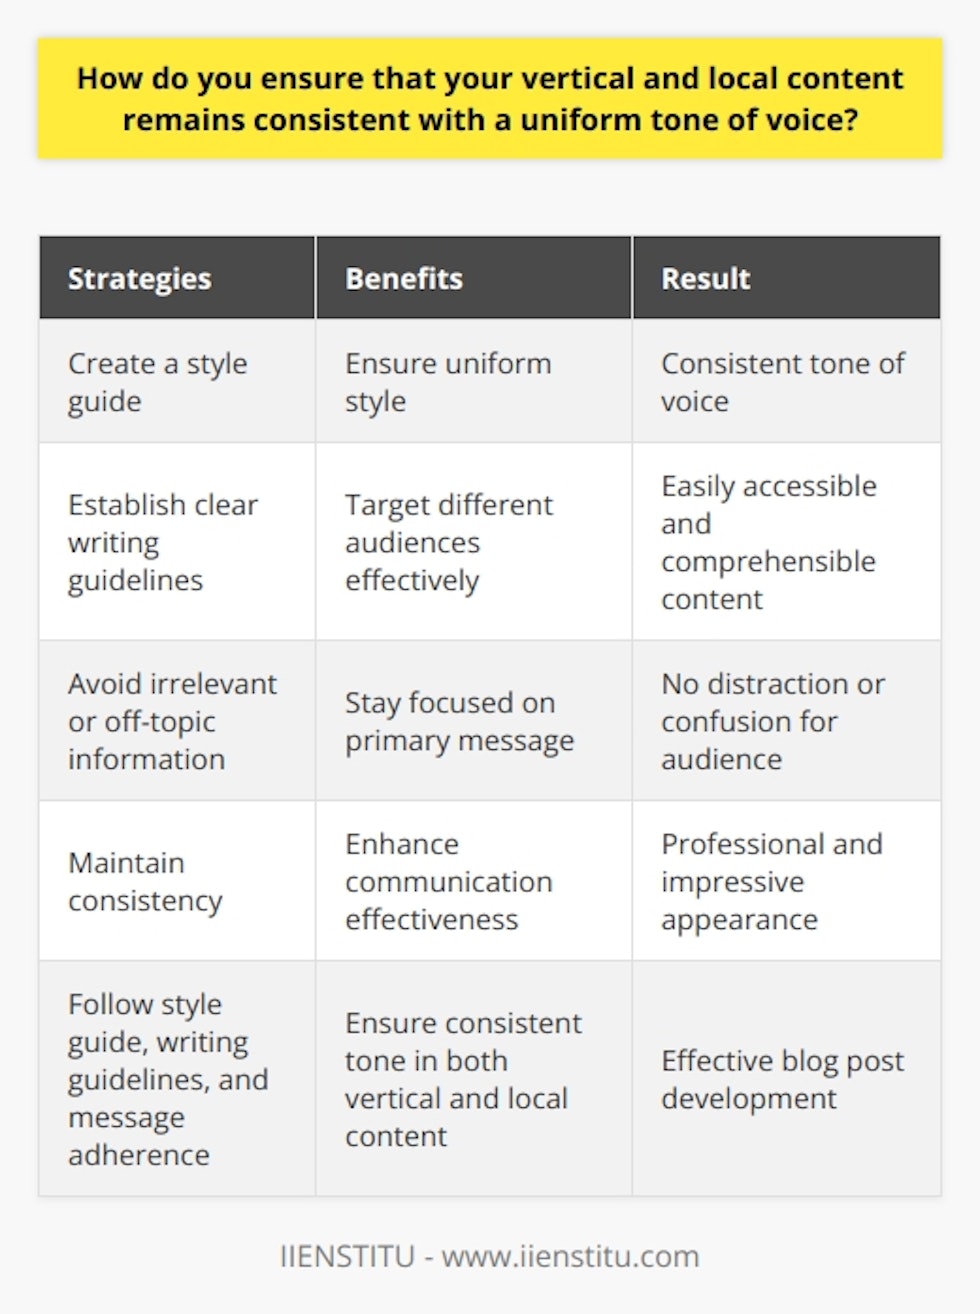 To maintain a consistent tone of voice in your vertical and local content, it is important to follow certain strategies. First and foremost, you need to create a style guide that provides specific instructions on language usage, sentence structure, and other elements that contribute to the overall tone. This ensures that all authors maintain a uniform style regardless of the type of content they write.Additionally, establishing clear writing guidelines is crucial. These guidelines should address how to write for different target audiences and what type of language to use. By keeping the language simple and concise, you can ensure that your content is easily accessible and comprehensible to readers.Consistency is key, so it is important to avoid including irrelevant or off-topic information in your post. Stay focused on the primary message you want to convey and refrain from introducing unrelated points that might distract or confuse your audience.By following these strategies, you can ensure that your vertical and local content maintains a consistent tone of voice. This consistency will not only enhance the effectiveness of your communication but also create a professional and impressive appearance for your intended audience.In conclusion, consistency in tone is vital for effective blog post development. Through the formulation of a style guide, clear writing guidelines, and ensuring adherence to the primary message, you can maintain a consistent tone in both your vertical and local content.